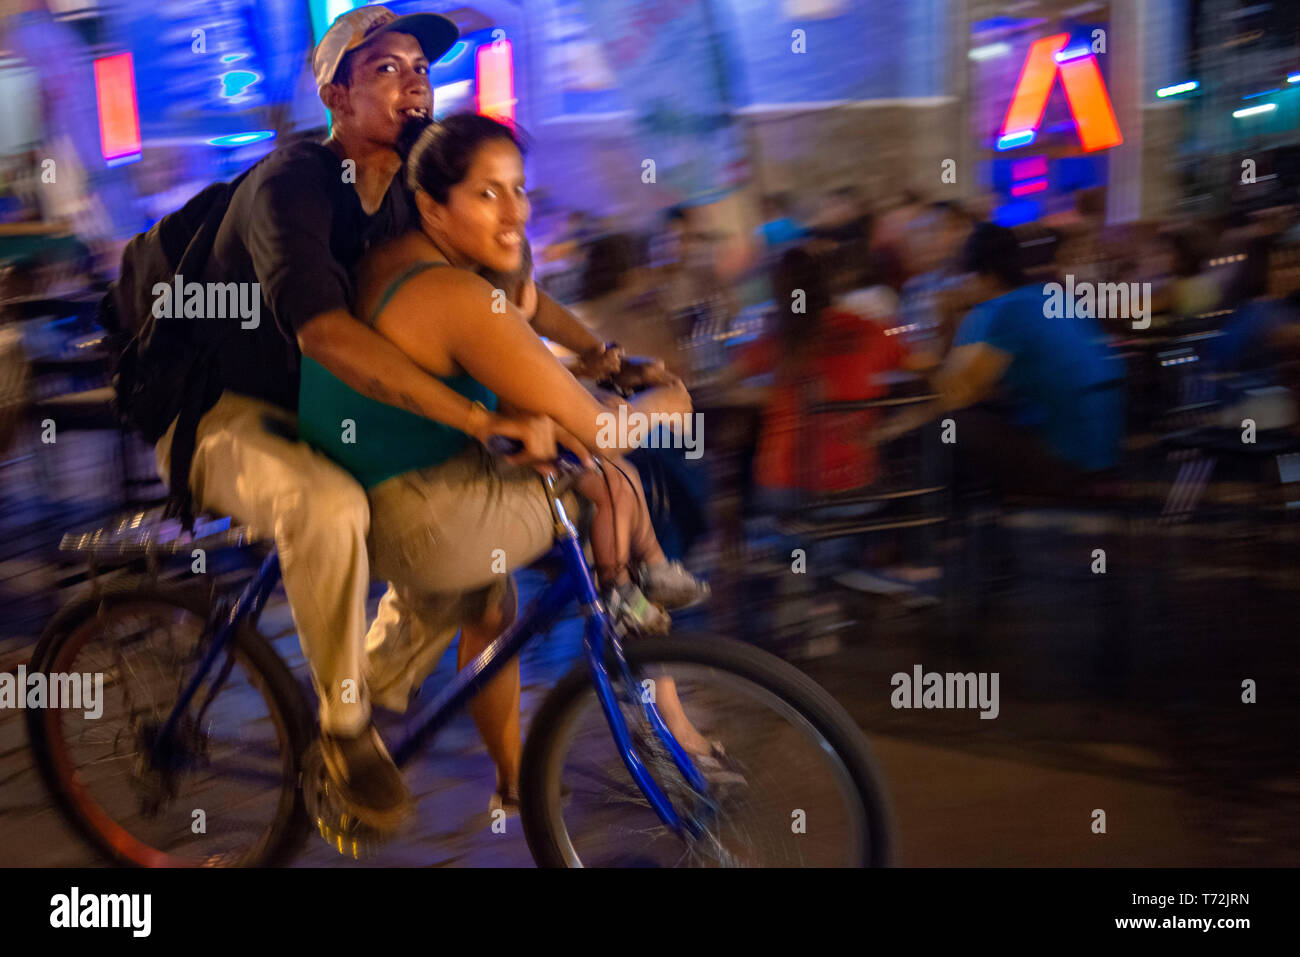 Local couple riding a bicycle in La Calzada a gastronomic street in Granada Nicaragua with lots of tourists and locals enjoying fine food outdoors. Gr Stock Photo